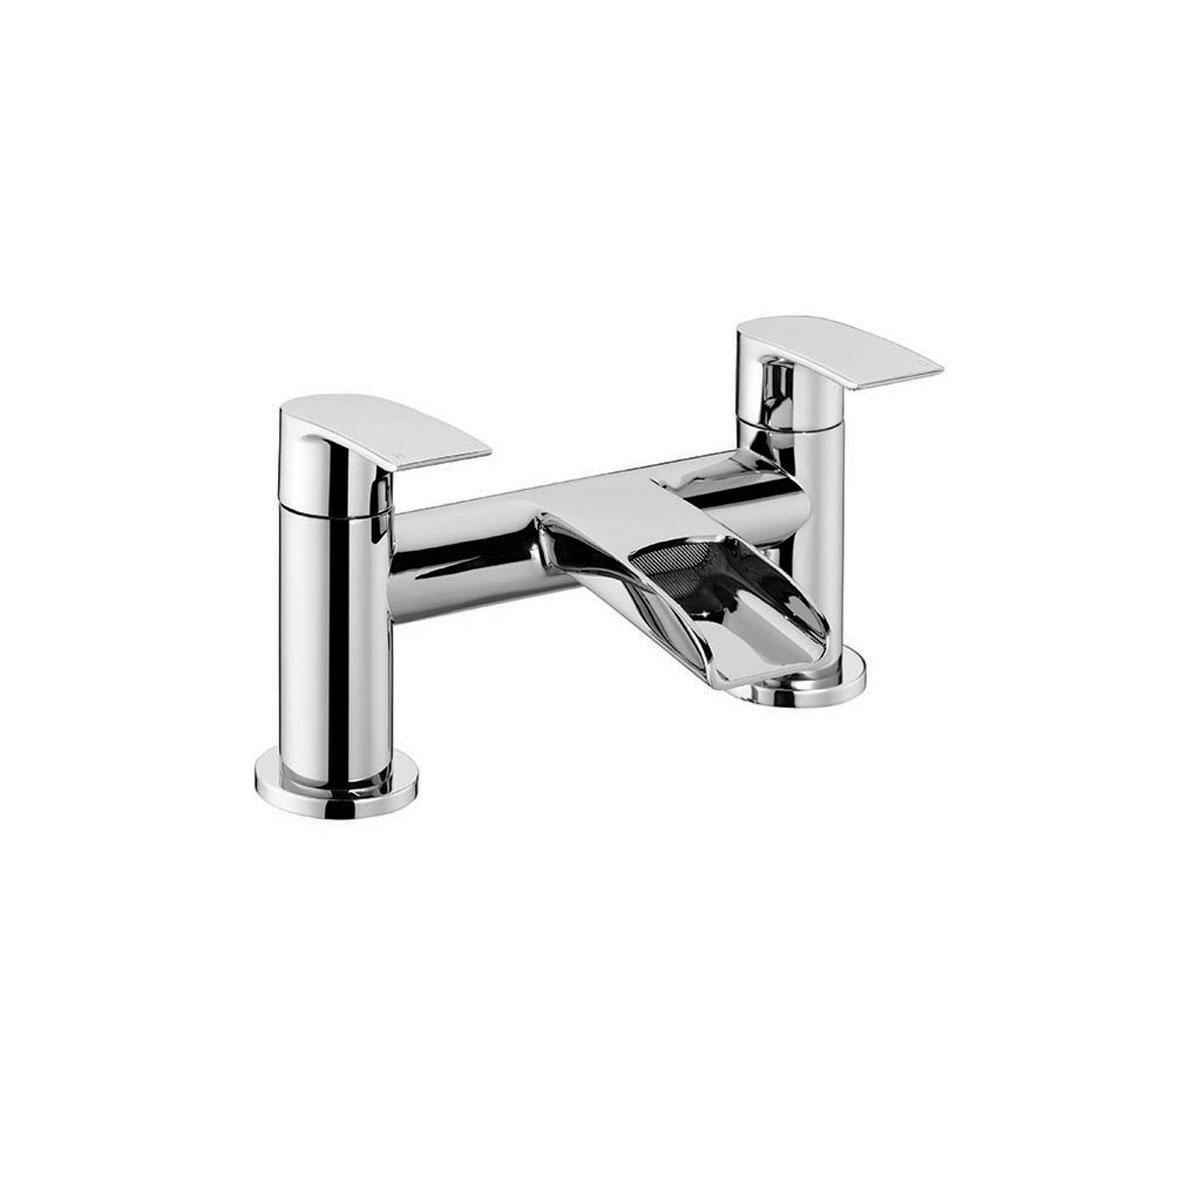 An image of Vino Curved Waterfall Spout Double Lever Bath Filler Tap - Chrome